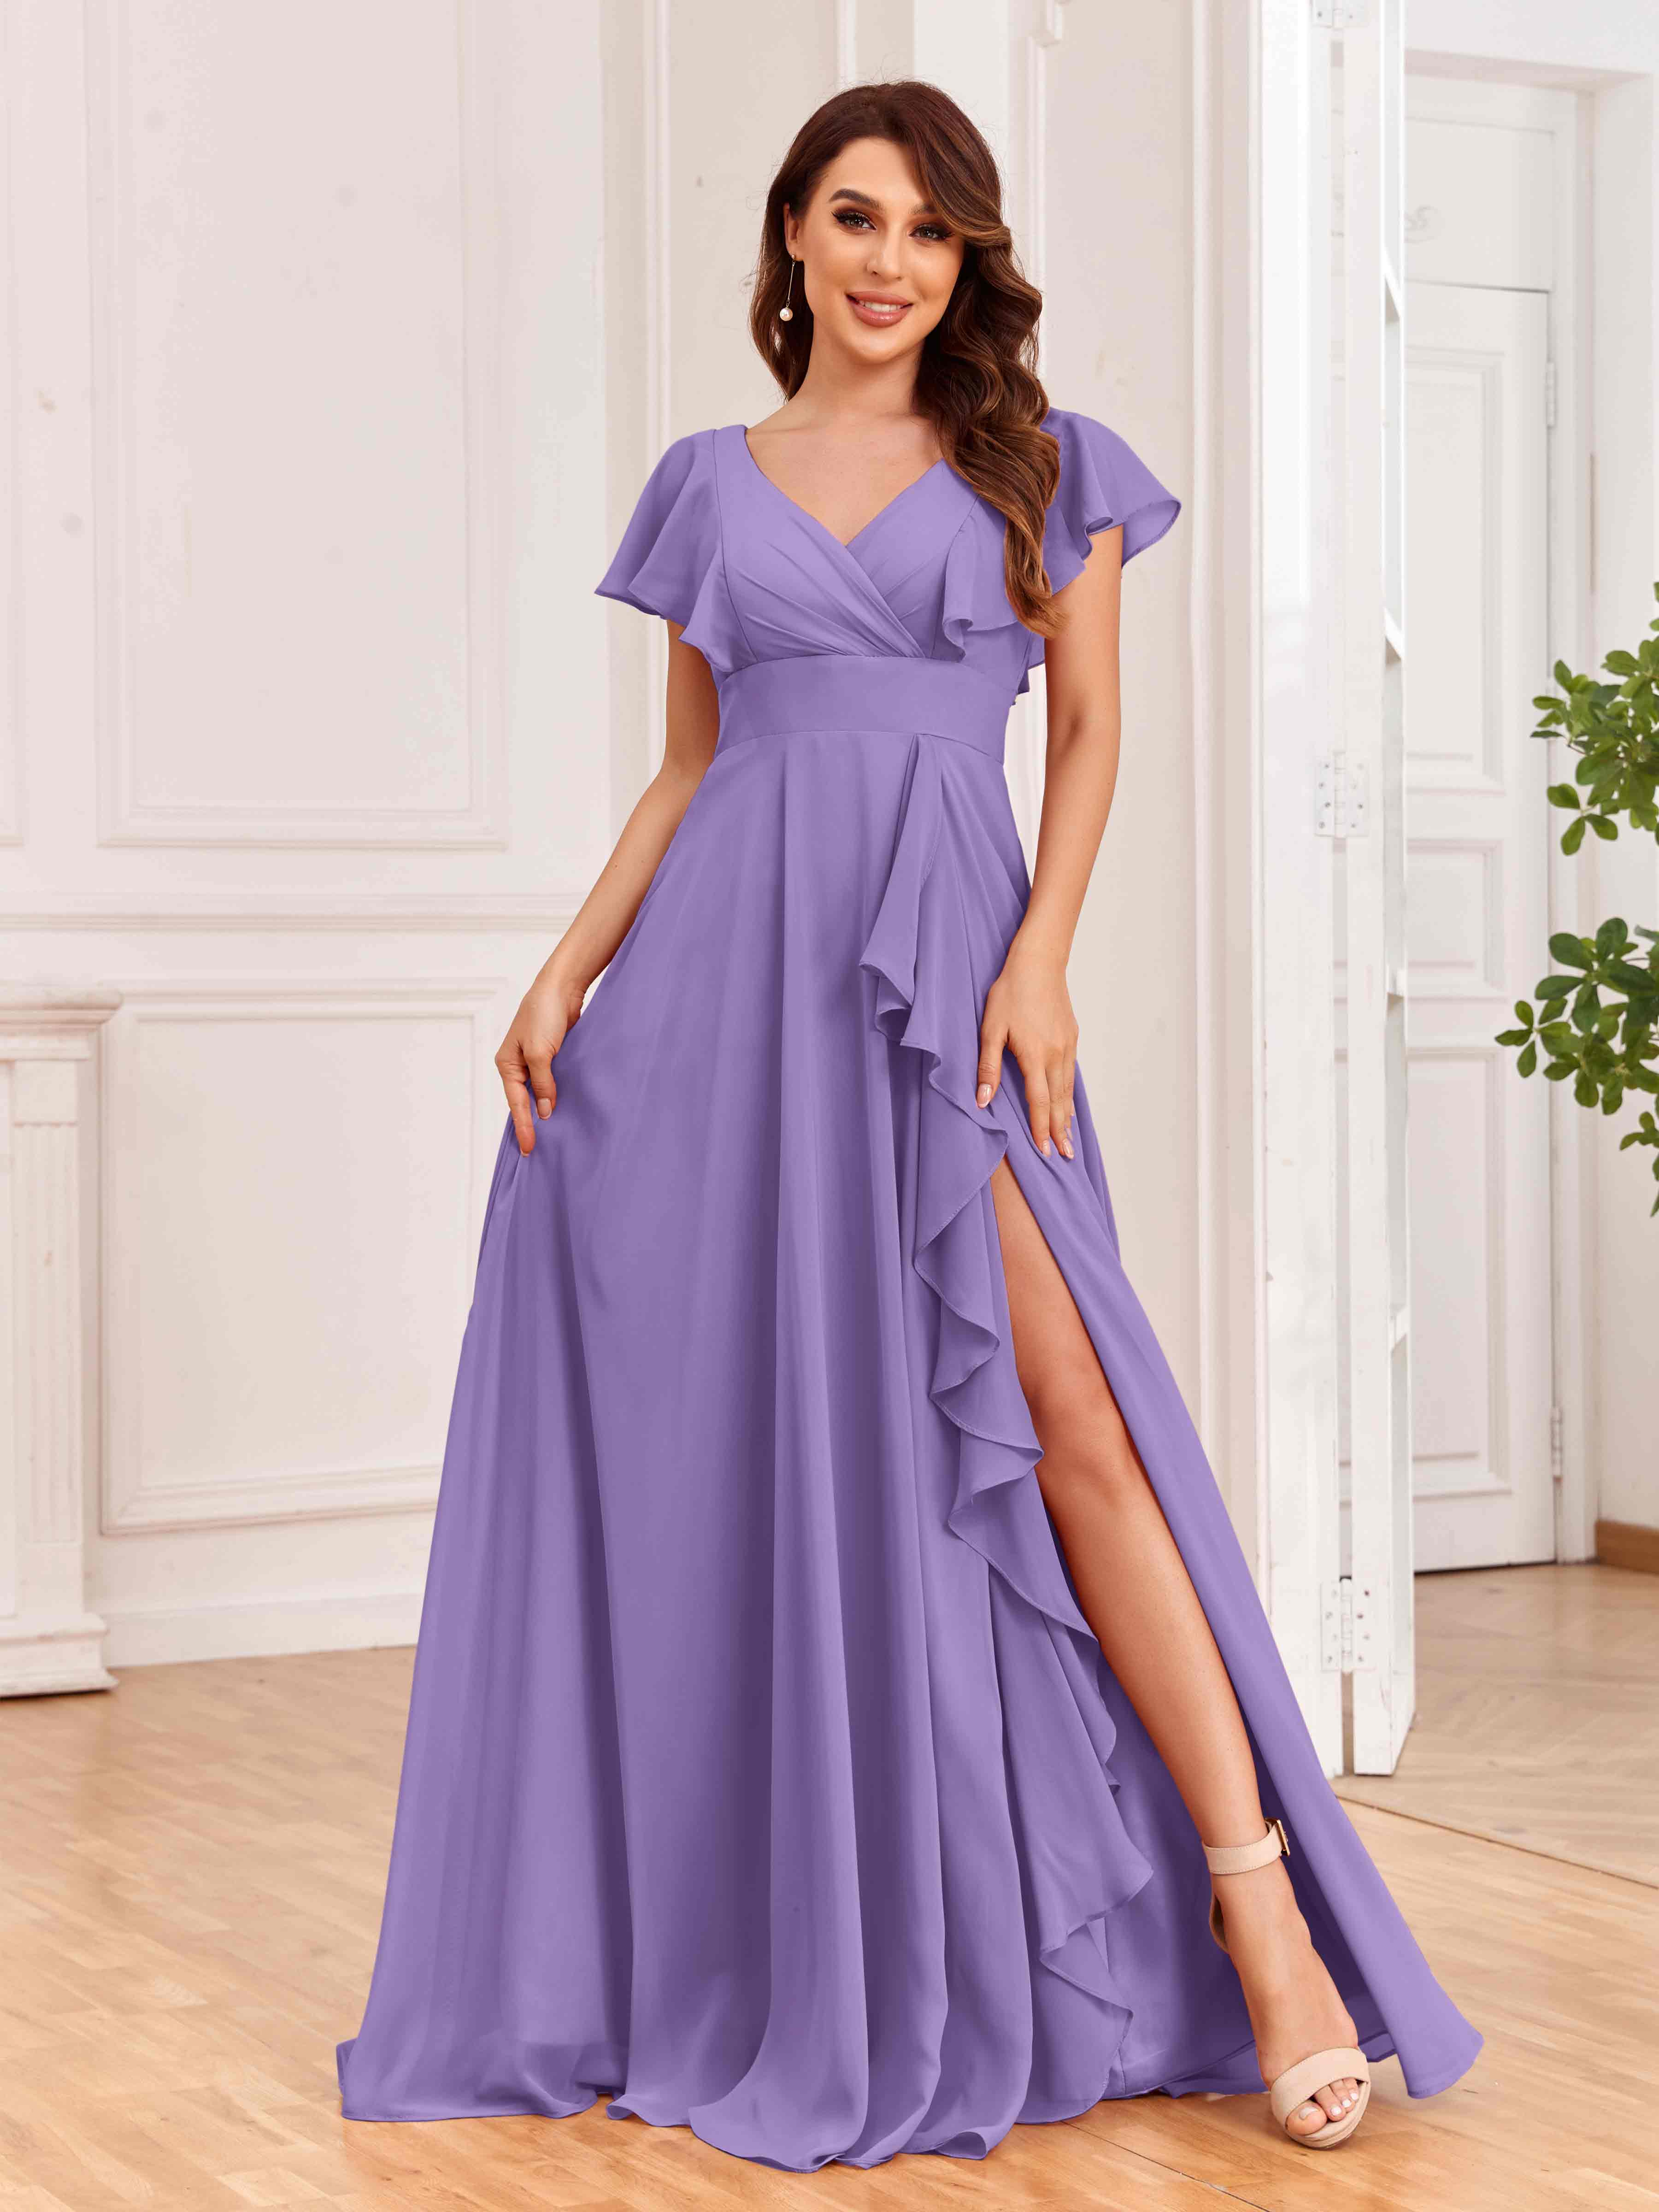 Tahiti Bridesmaid Dresses: Featuring V-Neck, Halter and Straps Styles